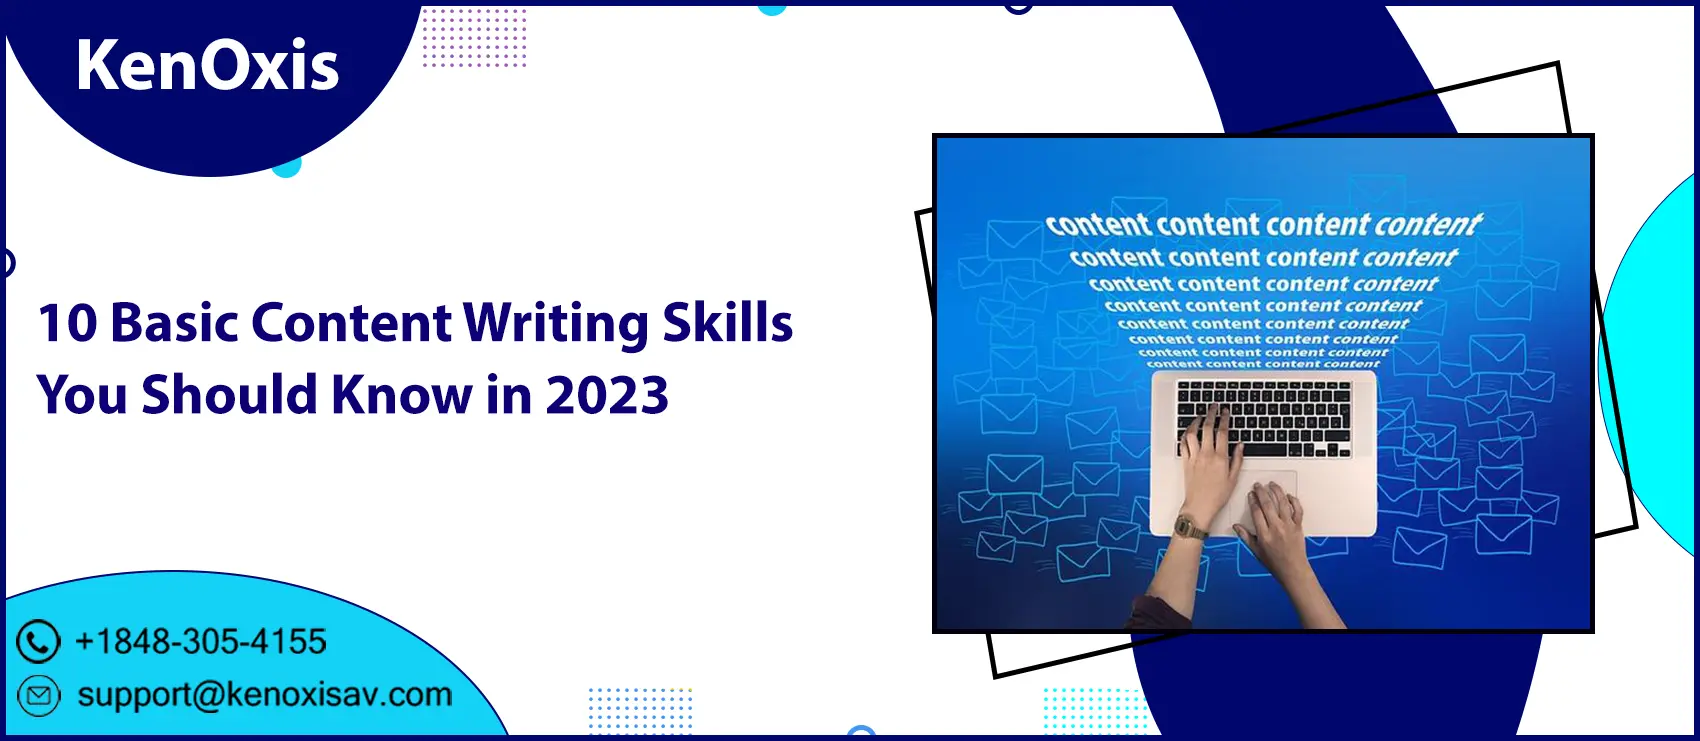 10 Basic Content Writing Skills You Should Know in 2023